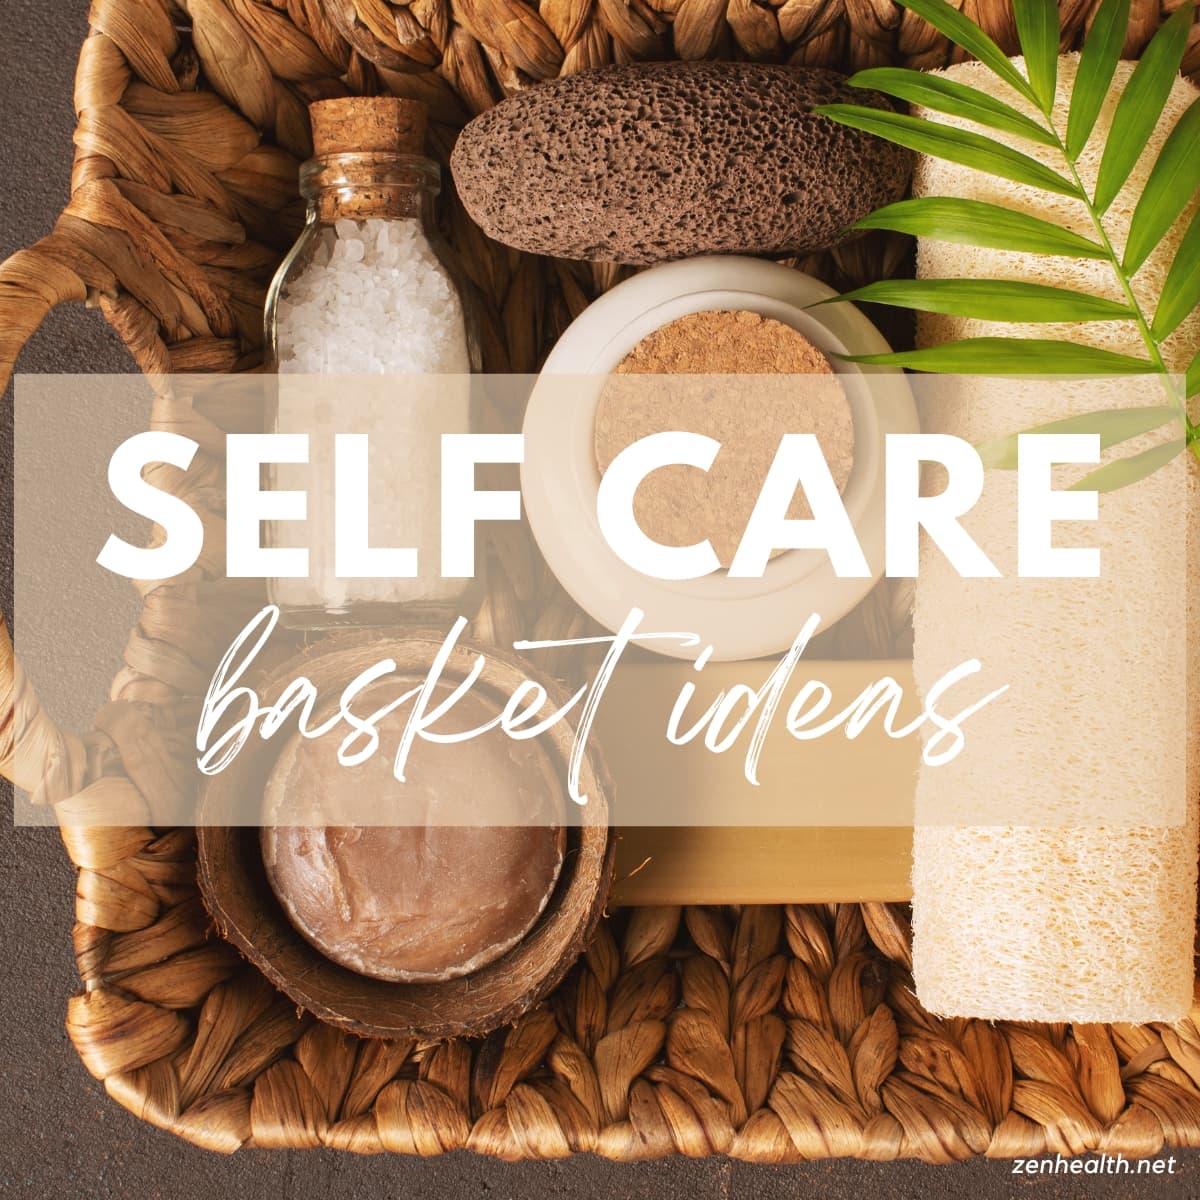 175 Self Care Basket Ideas to Treat Someone Special